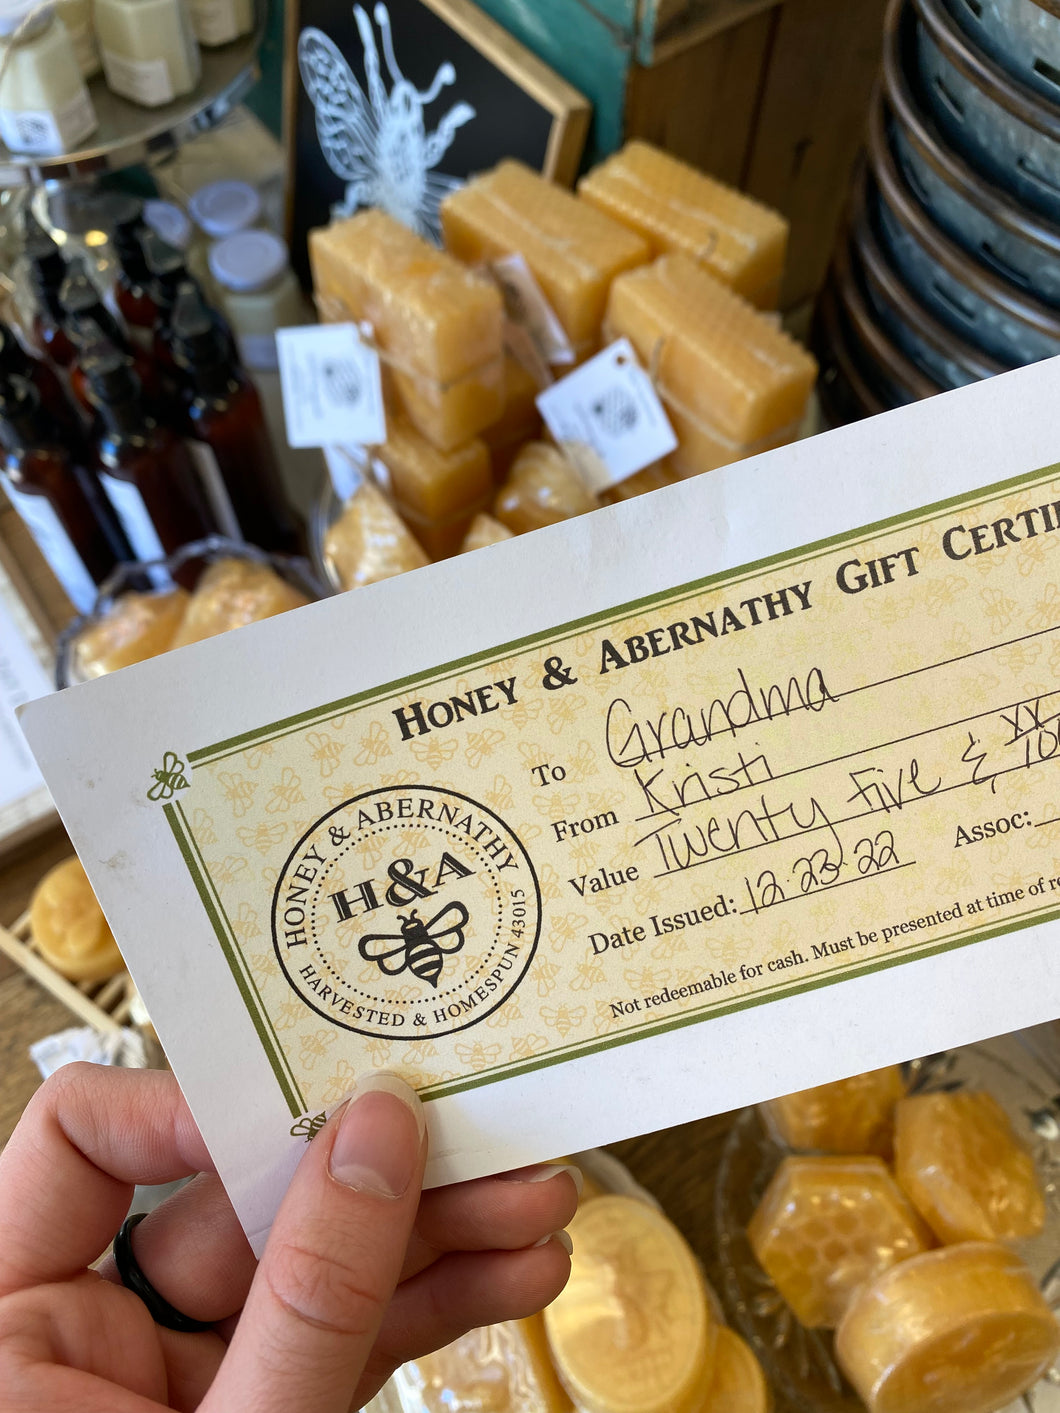 Honey & Abernathy Gift Certificate For In-Store Use